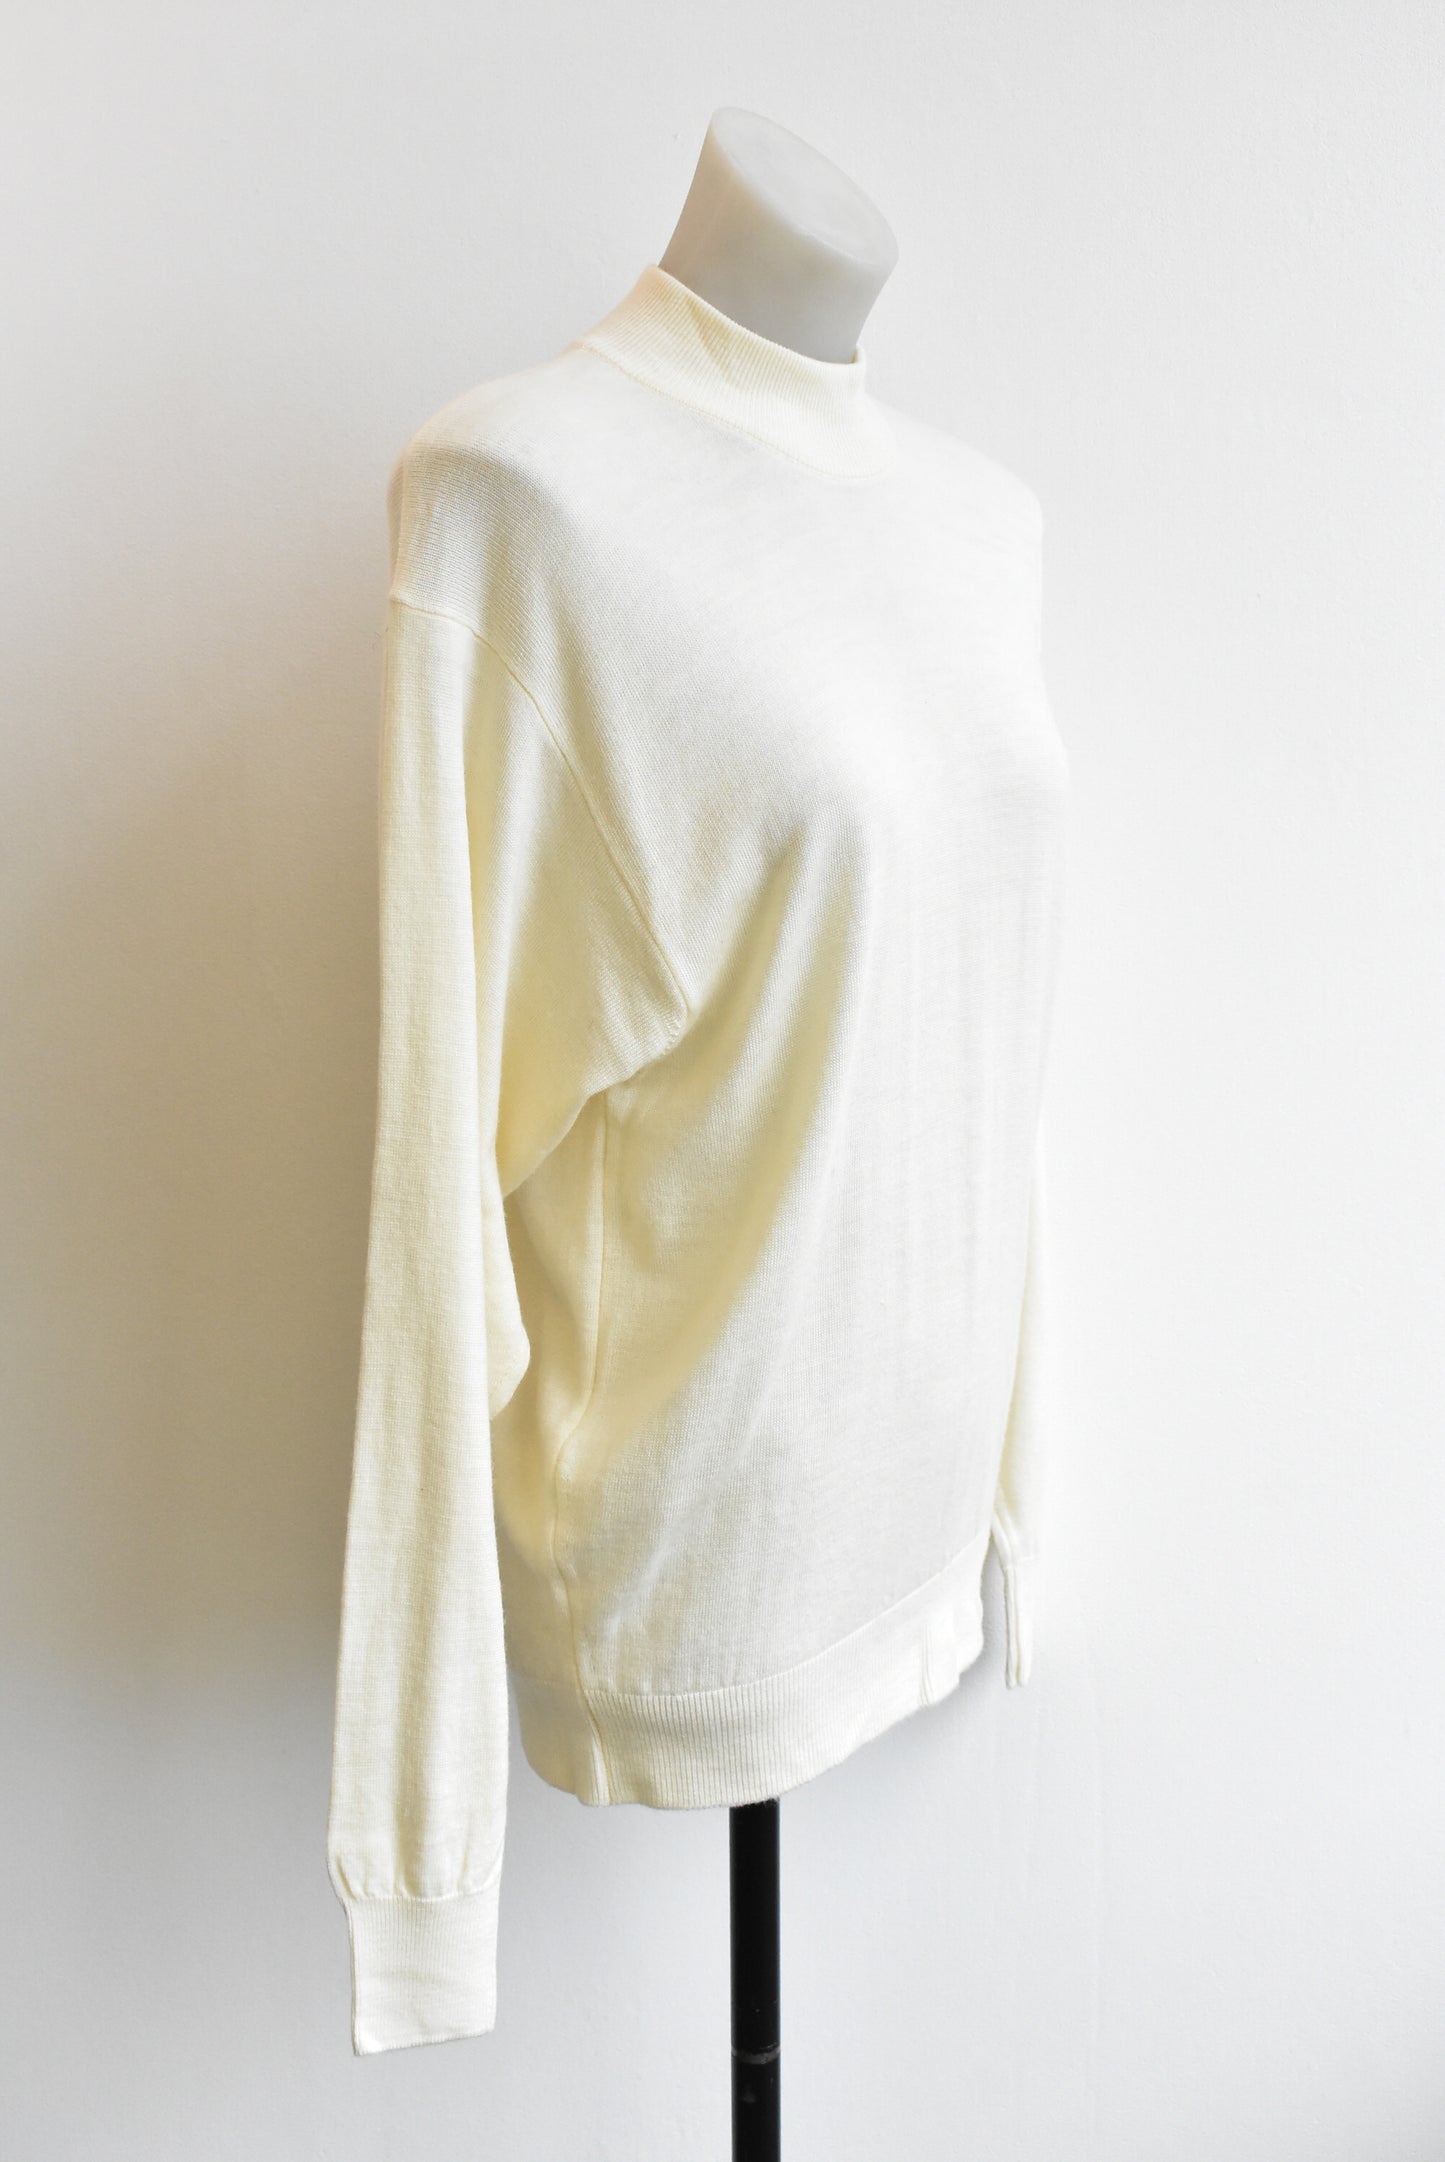 Ivory coloured sweater, size S-M